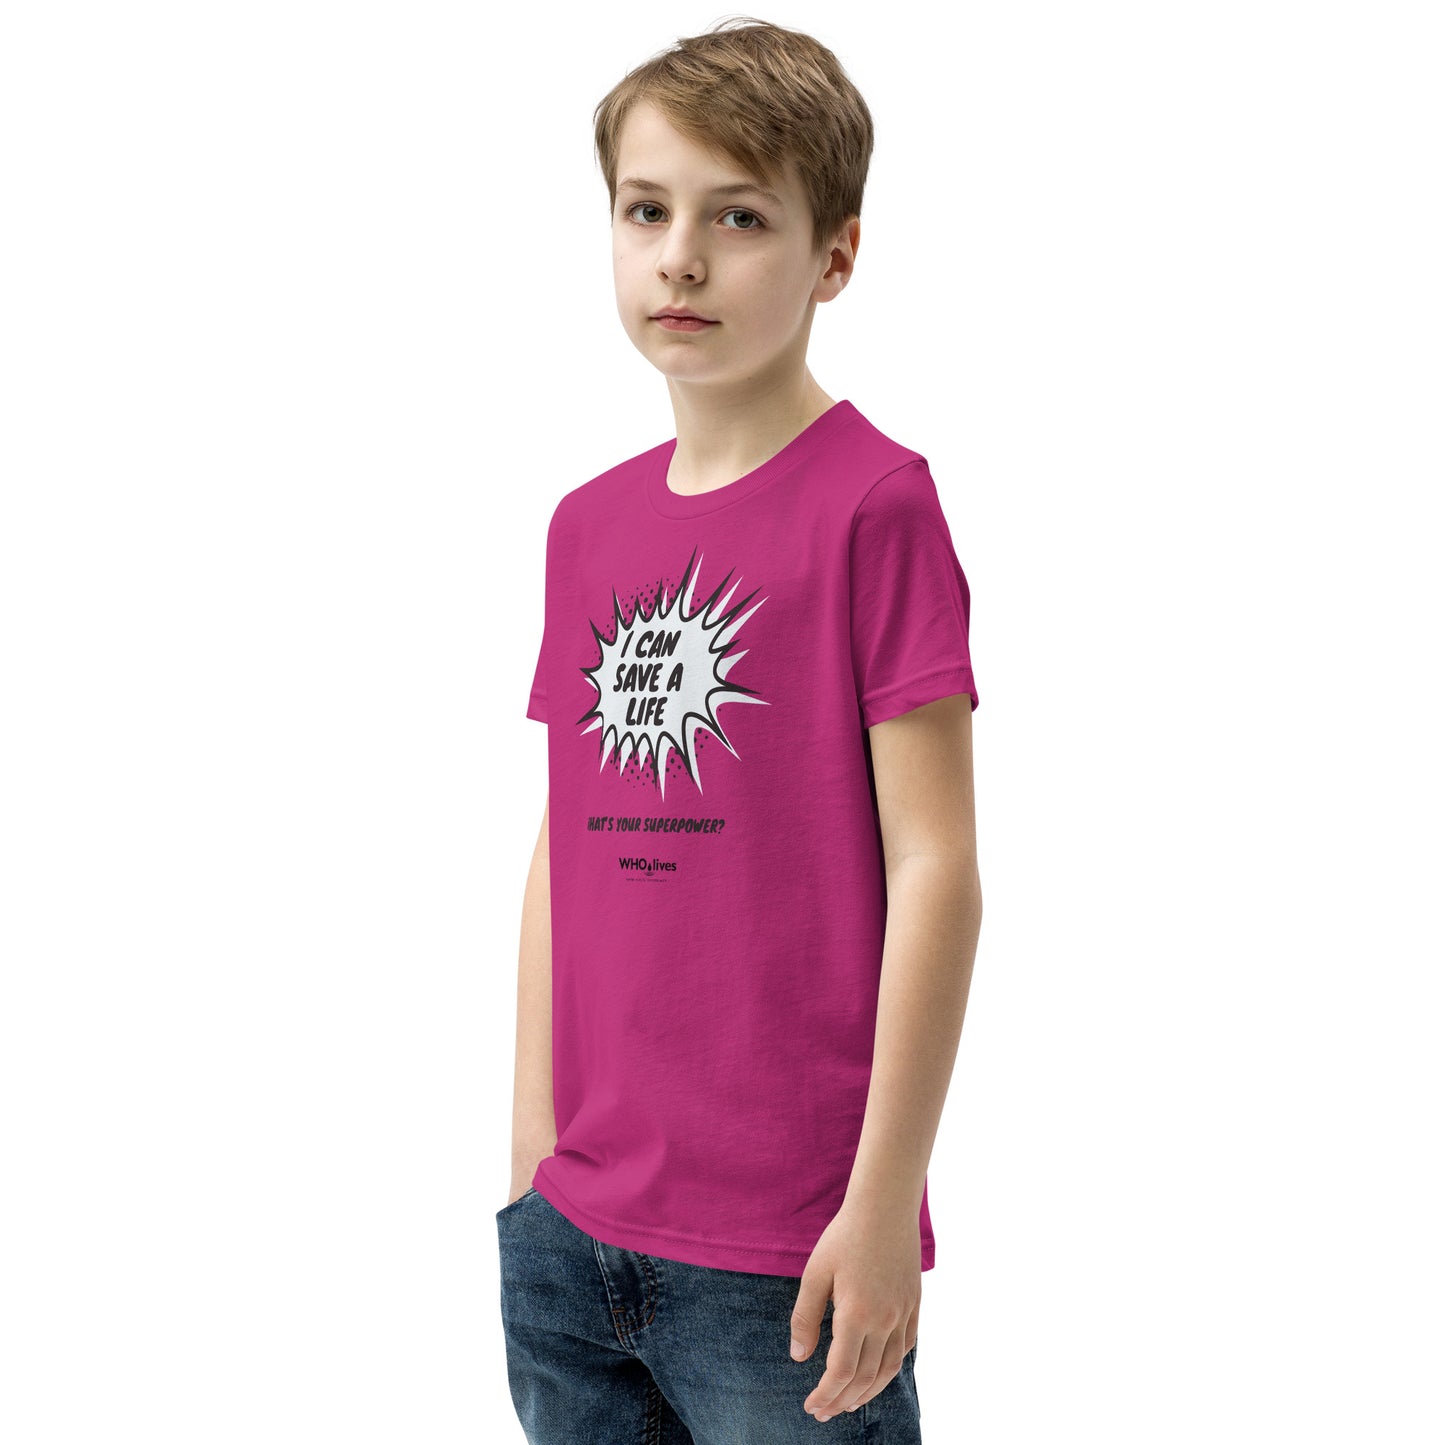 T-shirt (youth) | superpower